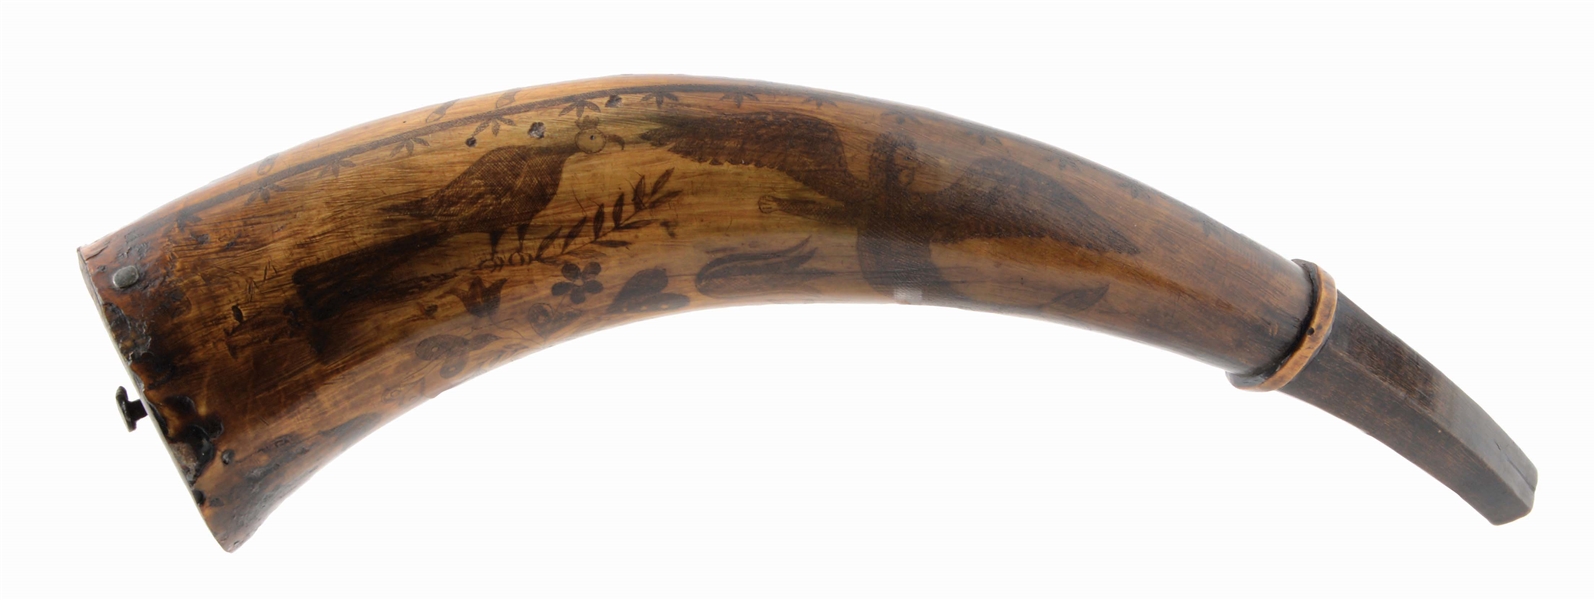 FOLK ART LANCASTER, PA ATTRIBUTED POWDER HORN ENGRAVED WITH A MOUNTED SOLDIER..